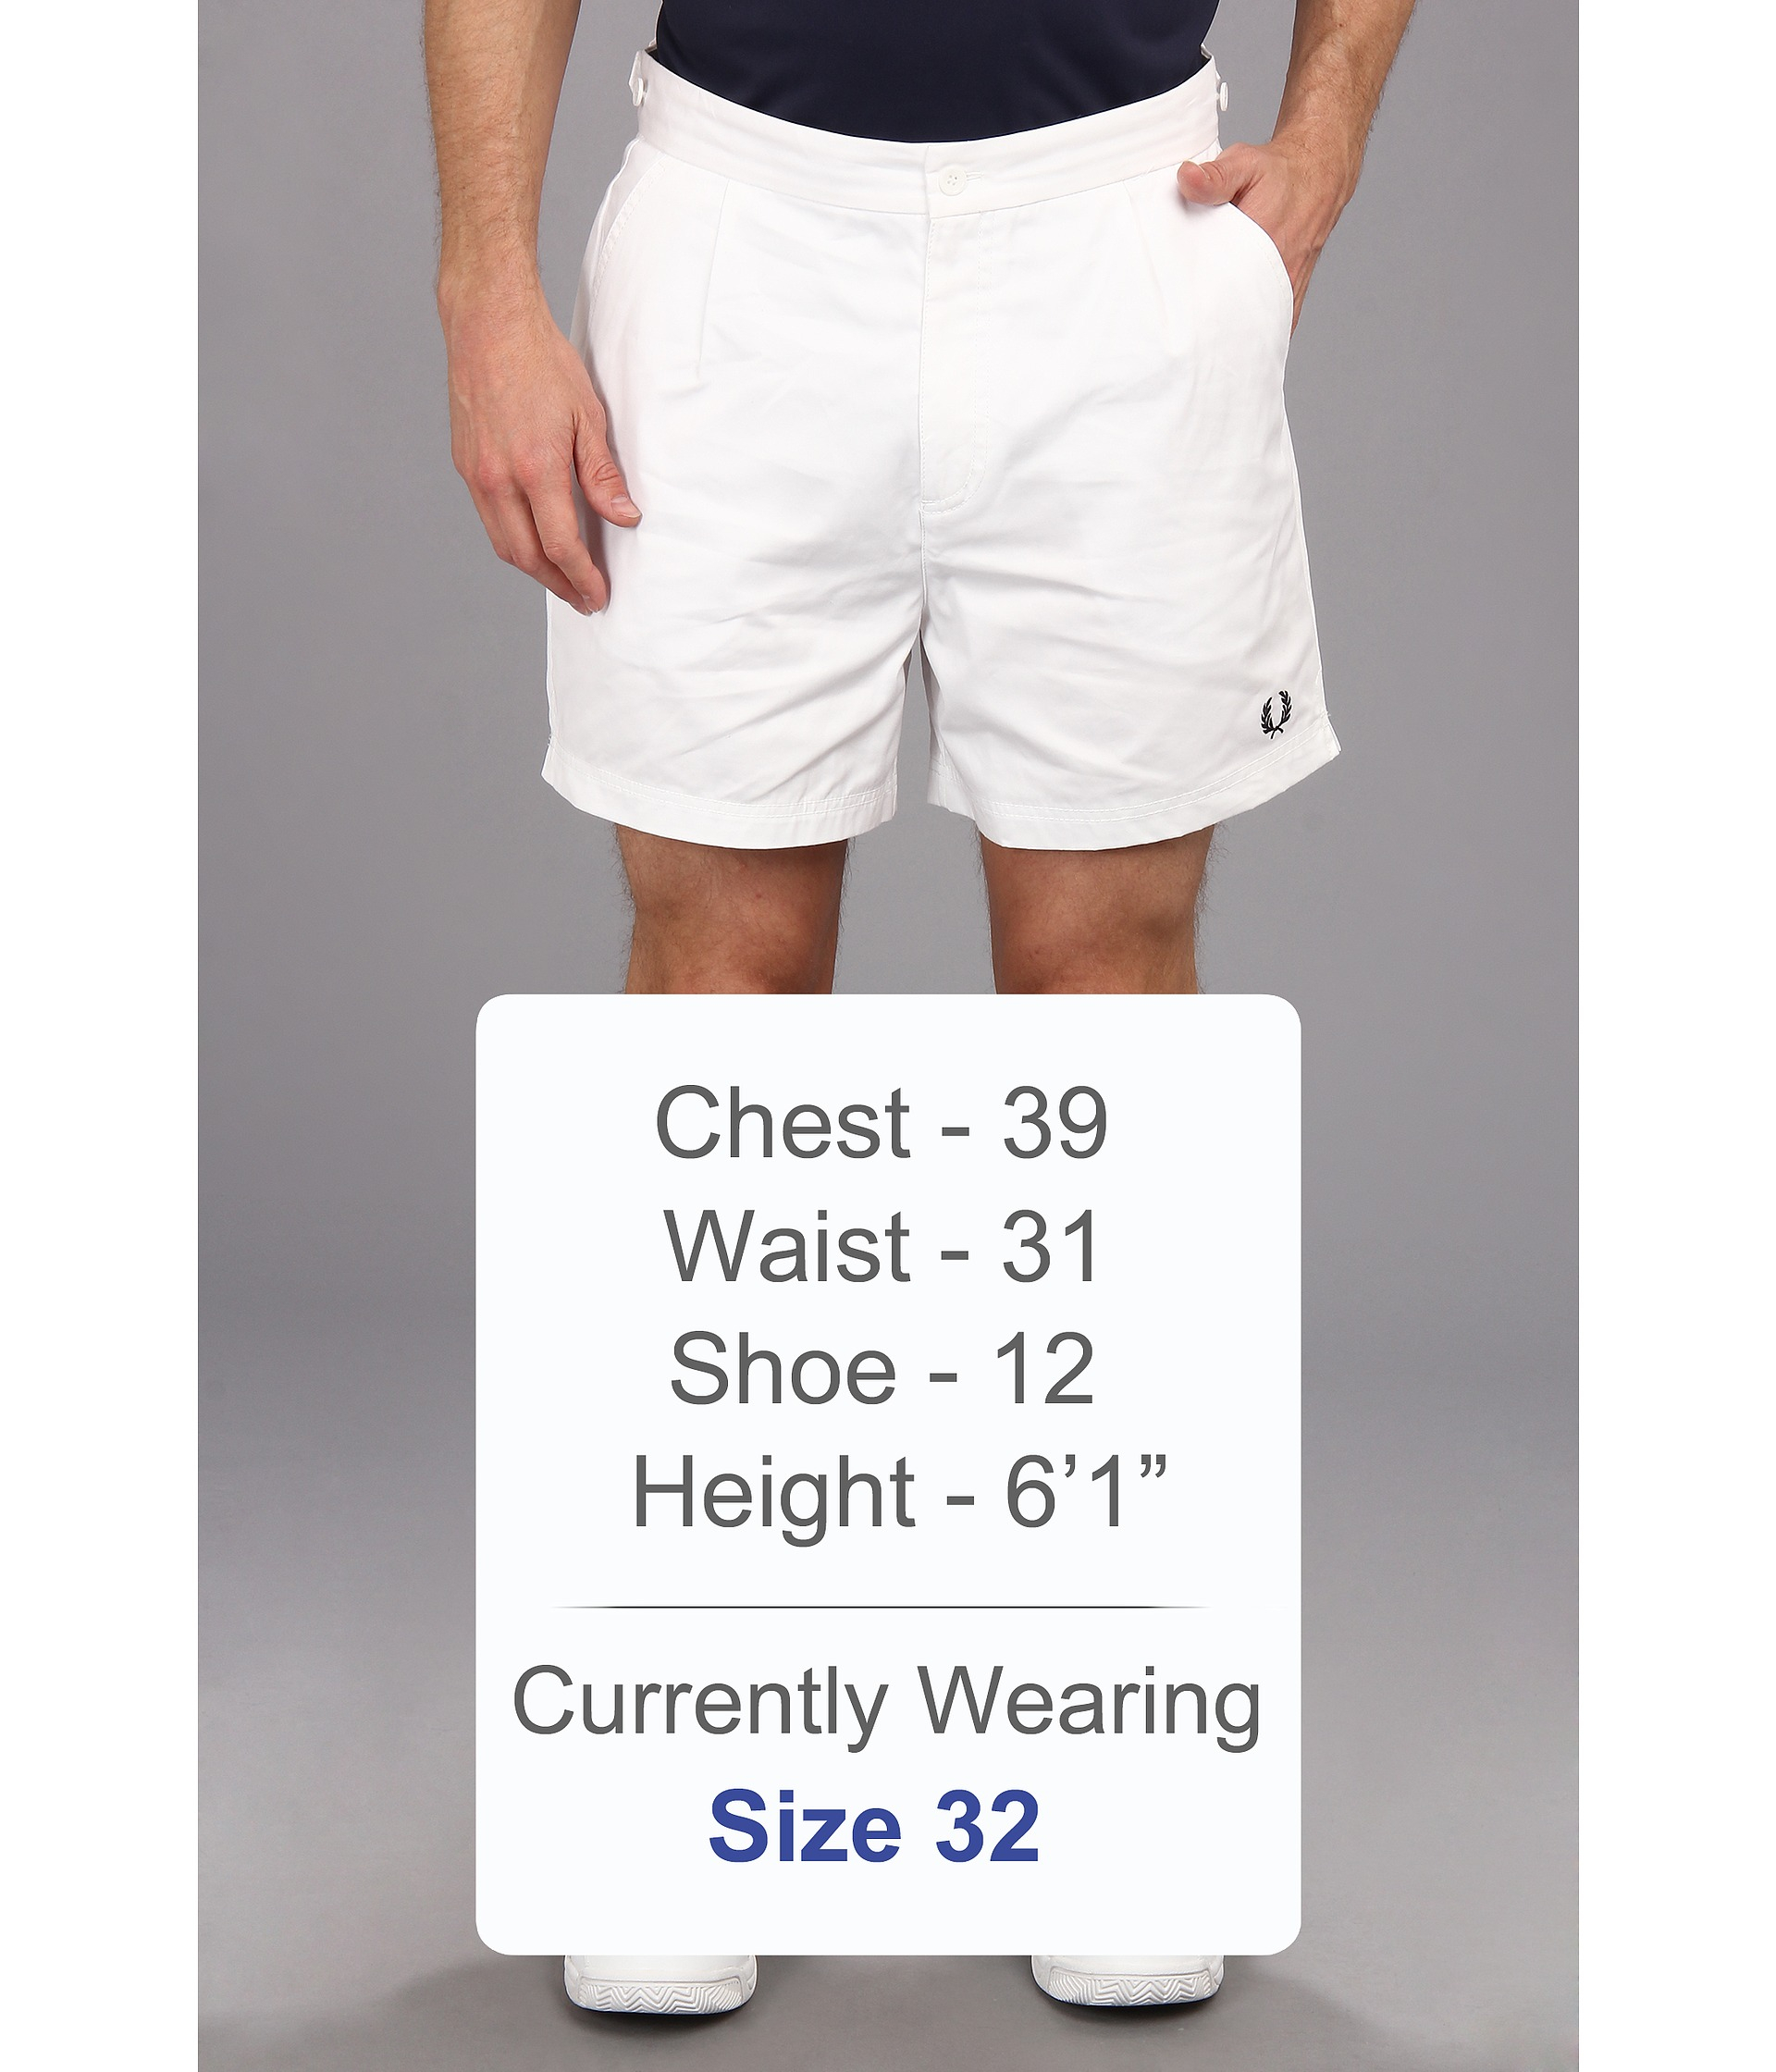 Fred Perry Tailored Tennis Shorts in White for Men - Lyst